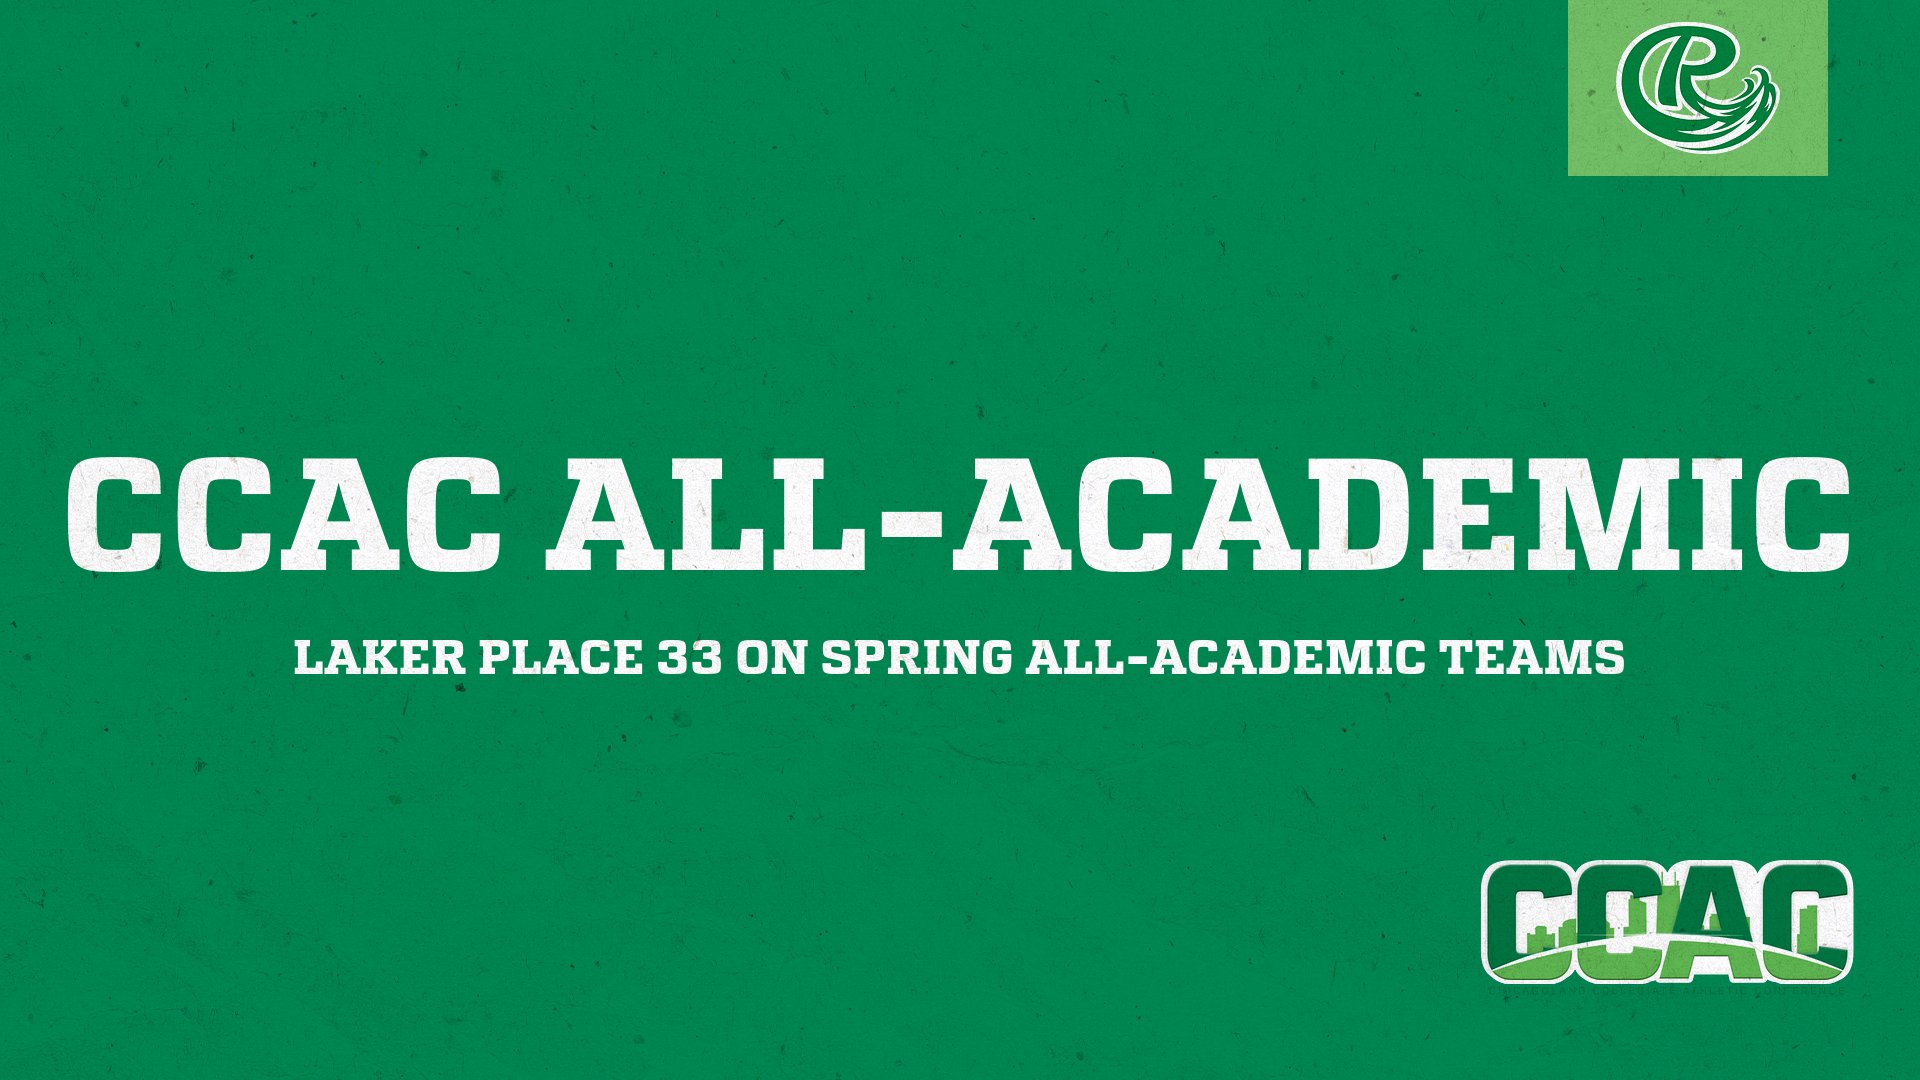 33 Lakers Named To CCAC Spring All-Academic Teams